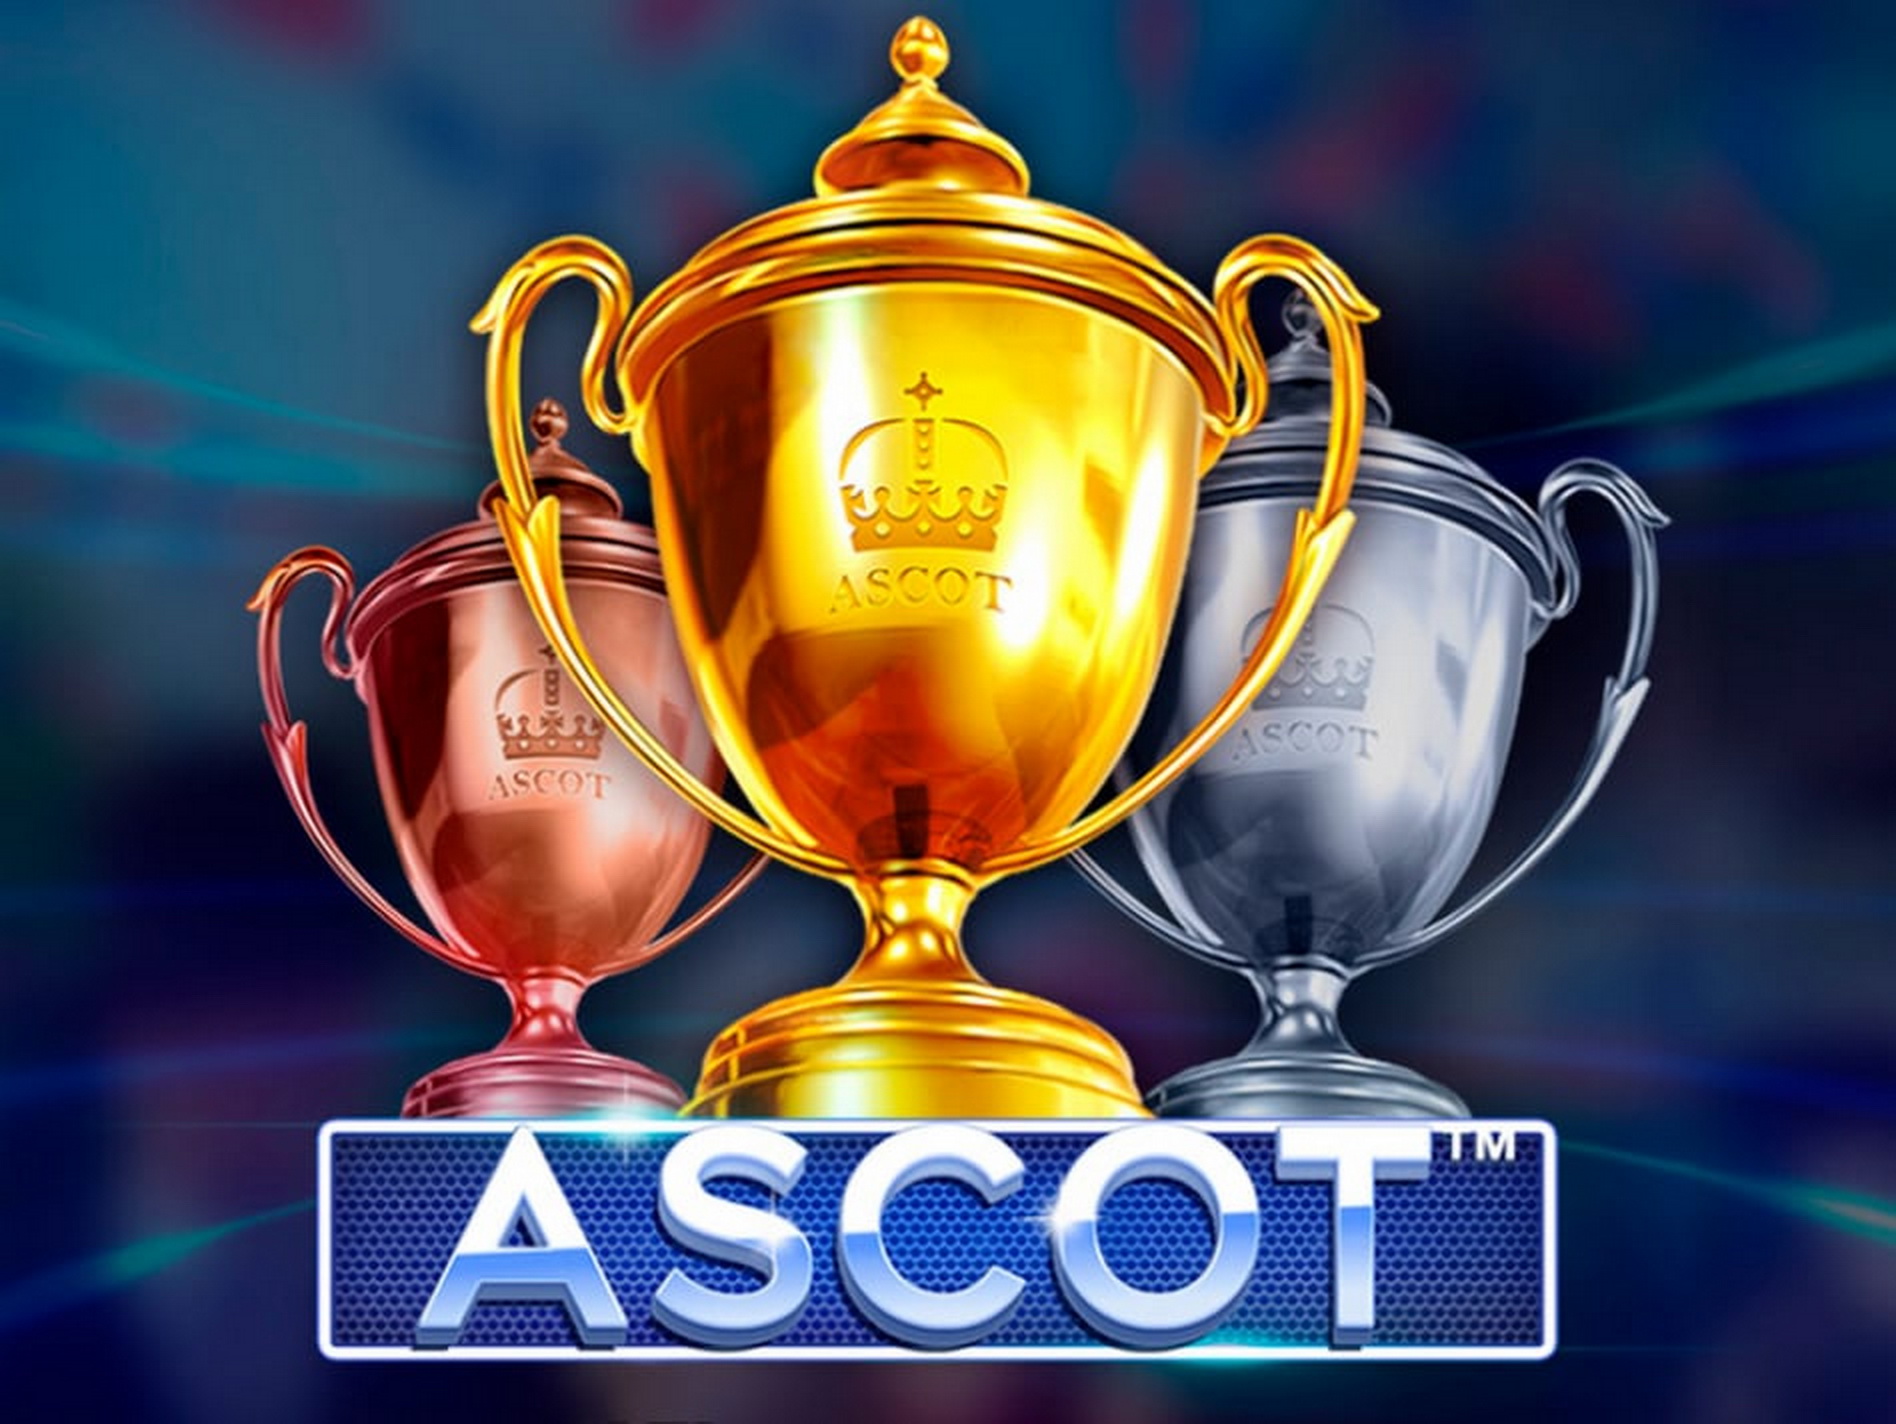 The Ascot - Sporting Legends Online Slot Demo Game by Playtech